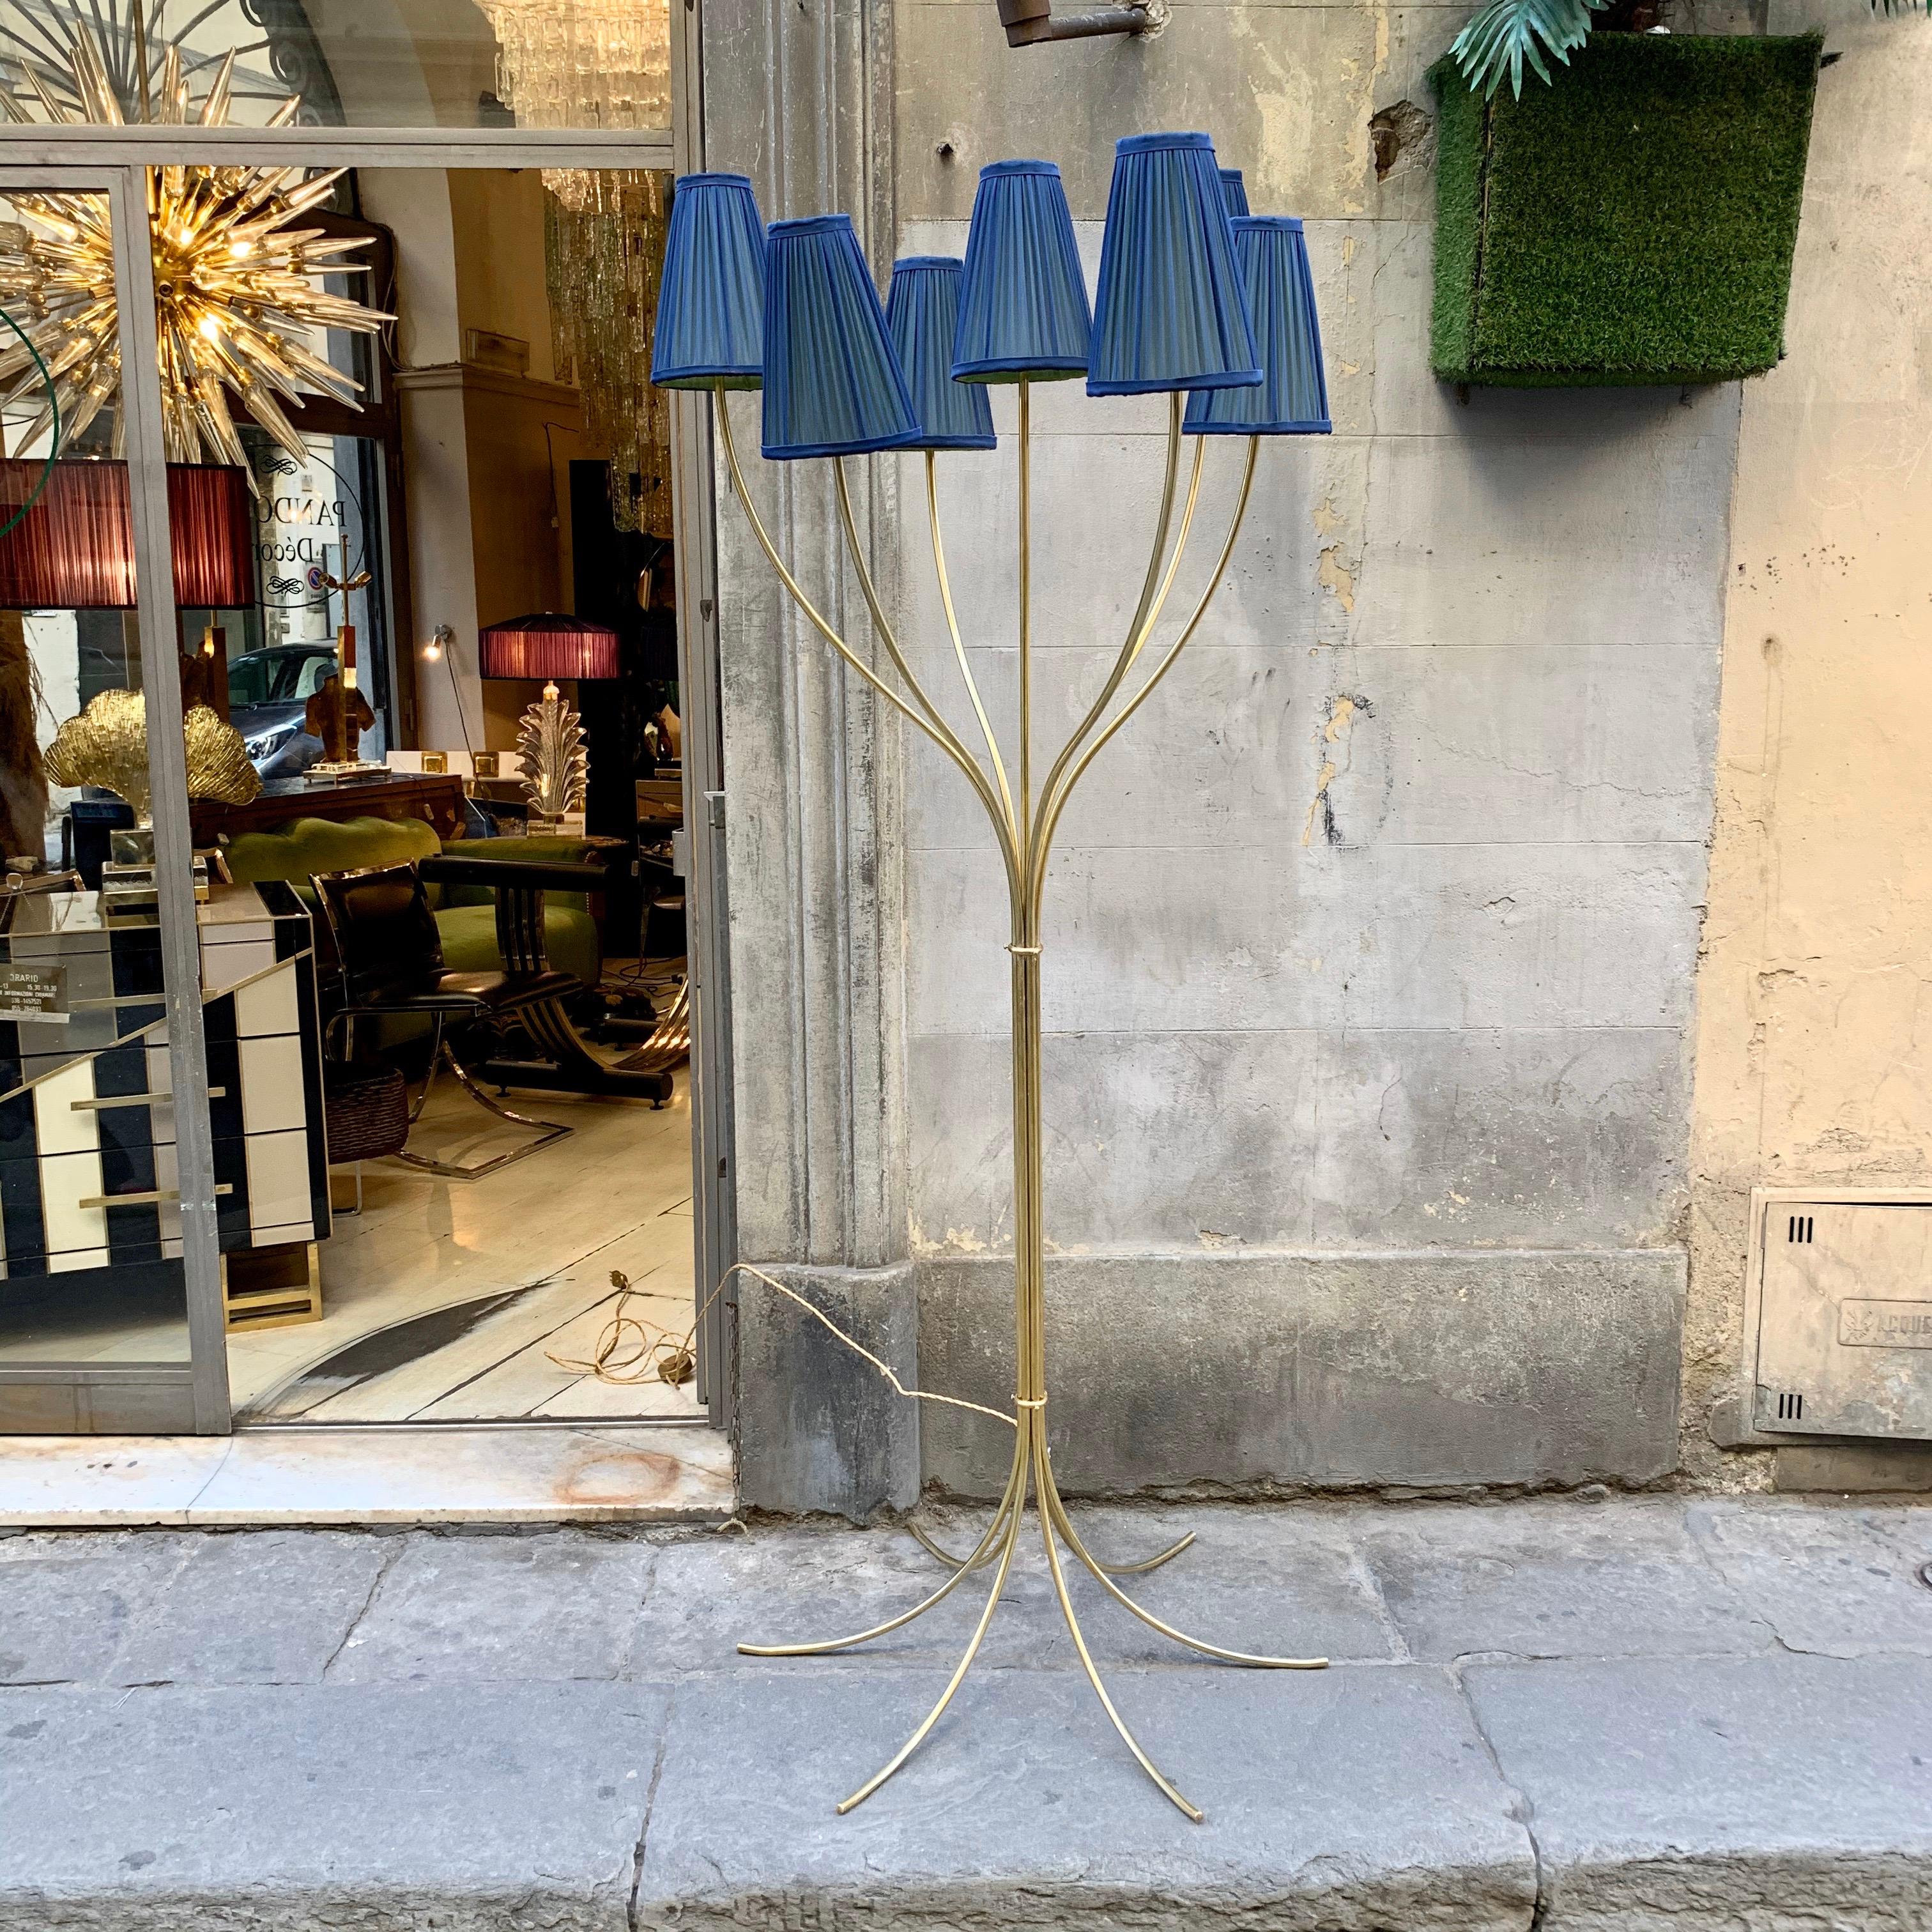 Brass floor lamp with 7 brass arms each ends with its lampshade. Our Lampshades are handcrafted in double pleated silk chiffon, acid green inside and royal blue outside. When the light is on the colors mix creating an amazing effect.
The floor lamp